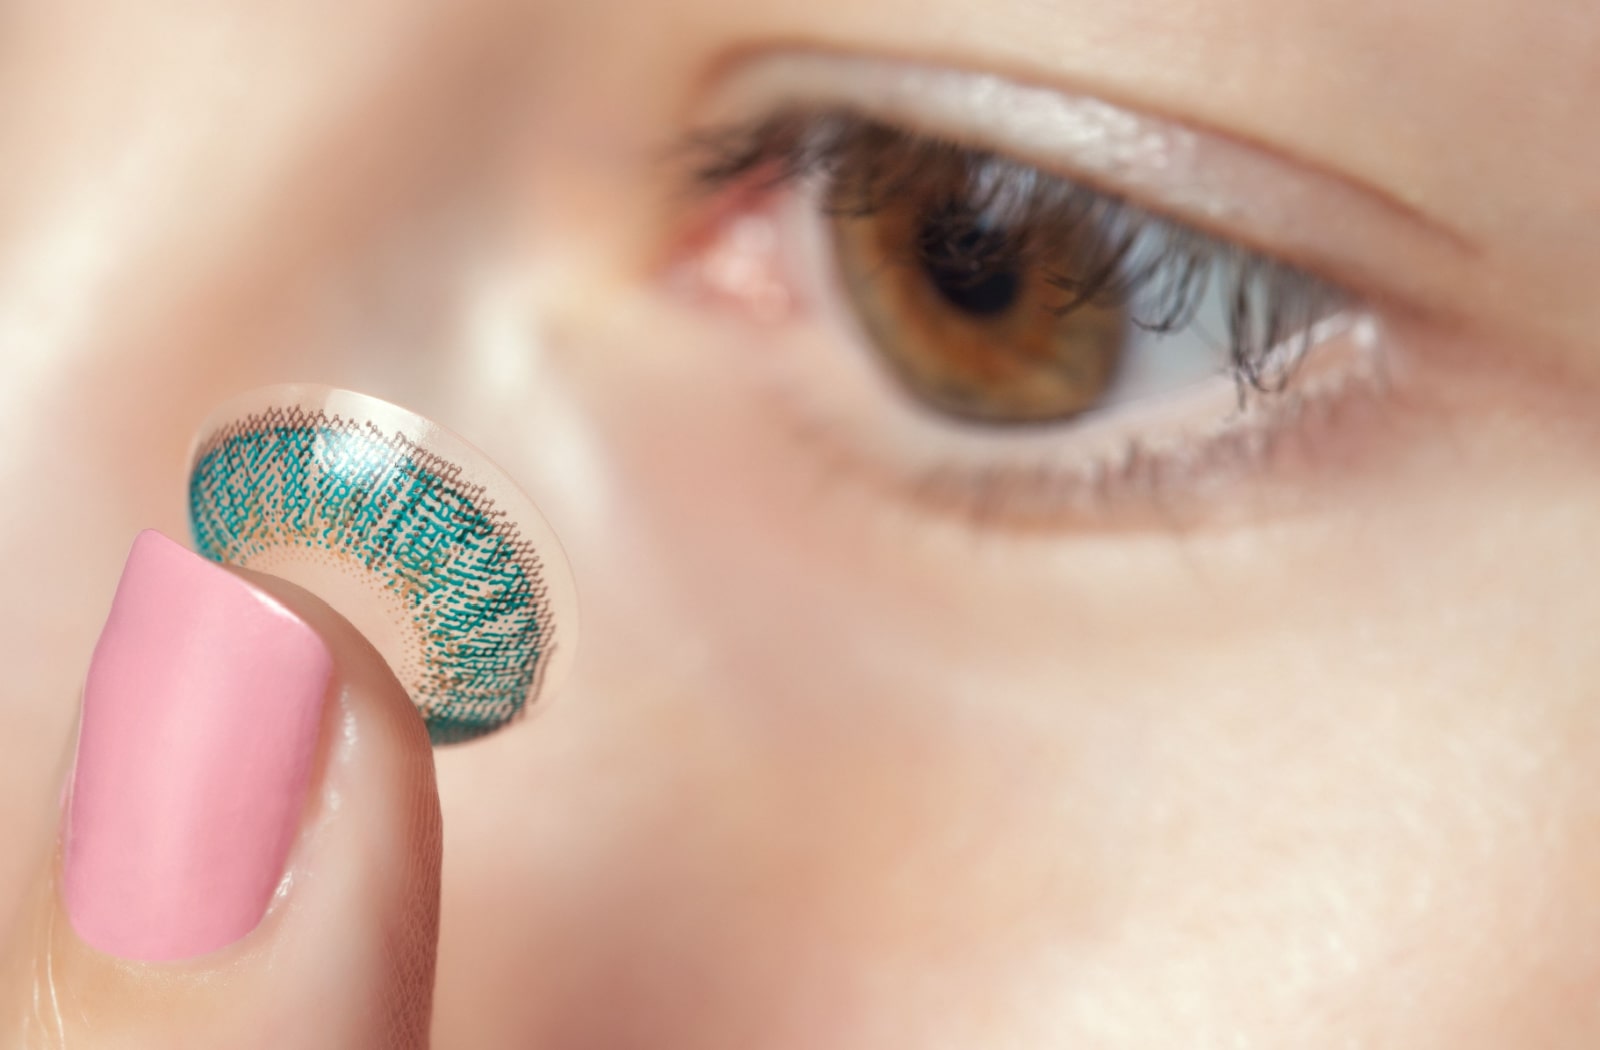 A woman holds a coloured contact lens on her index finger before placing it in her eye.